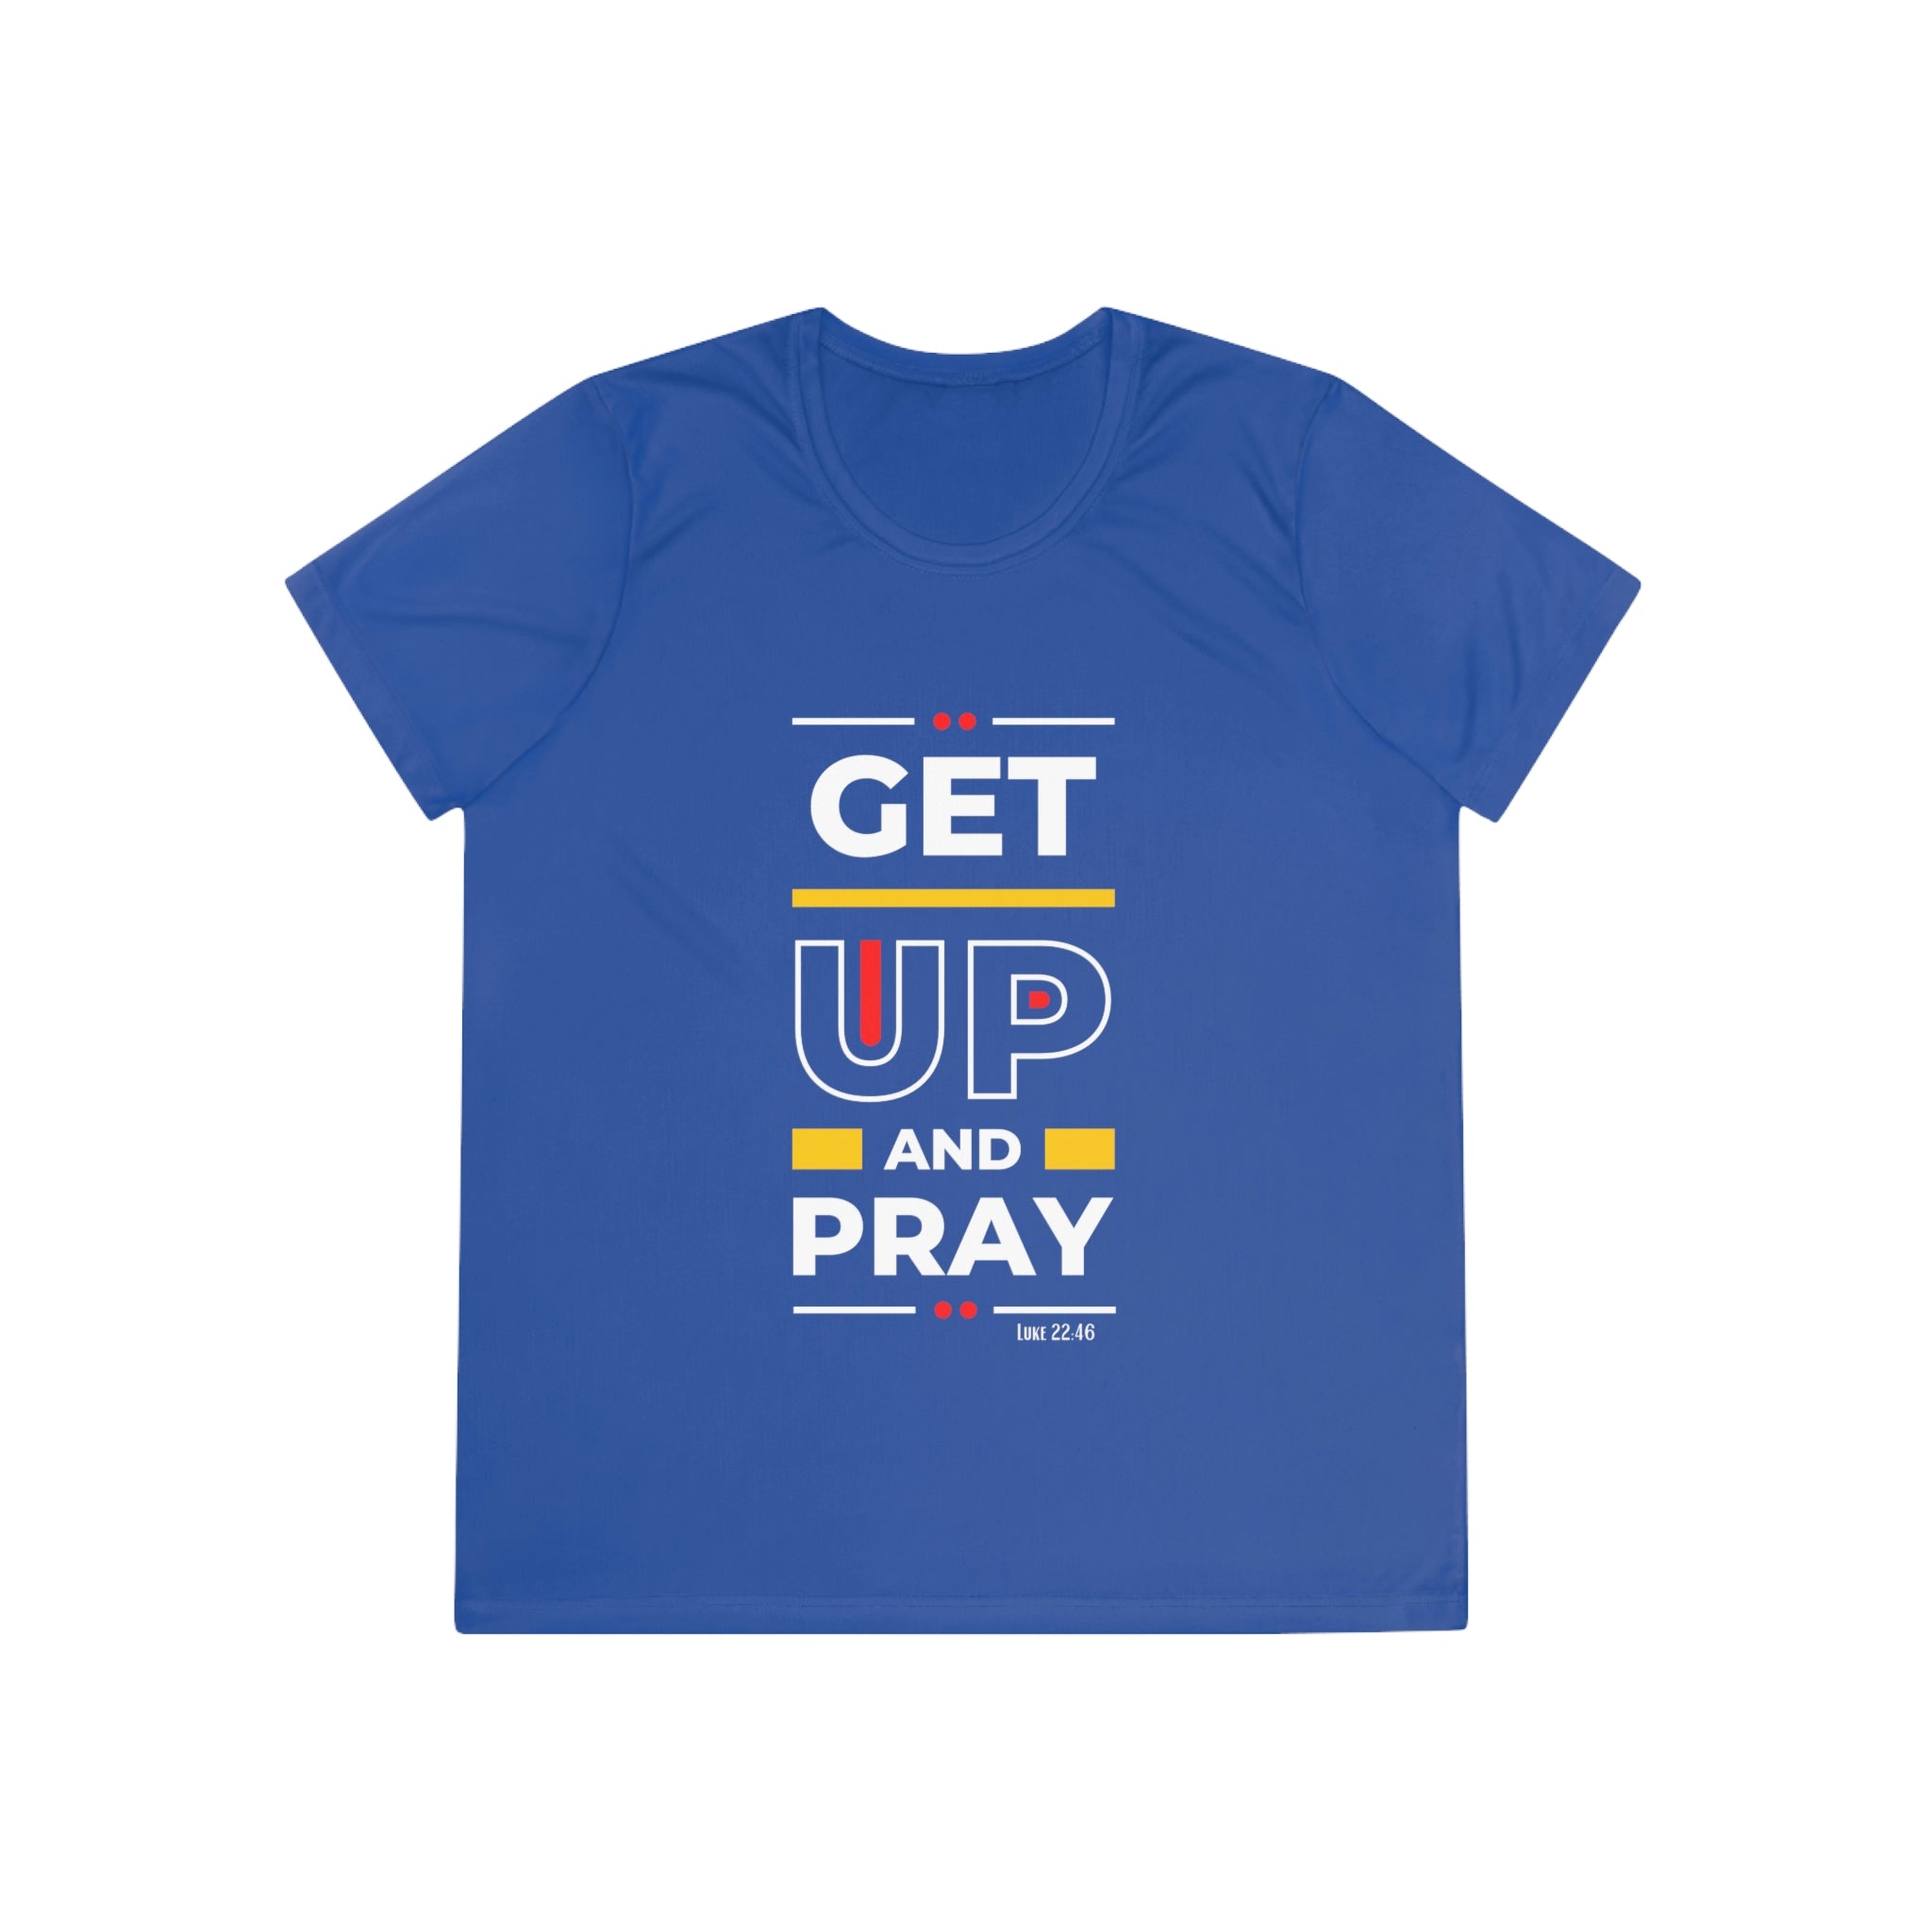 Get Up and Pray Ladies Competitor Tee